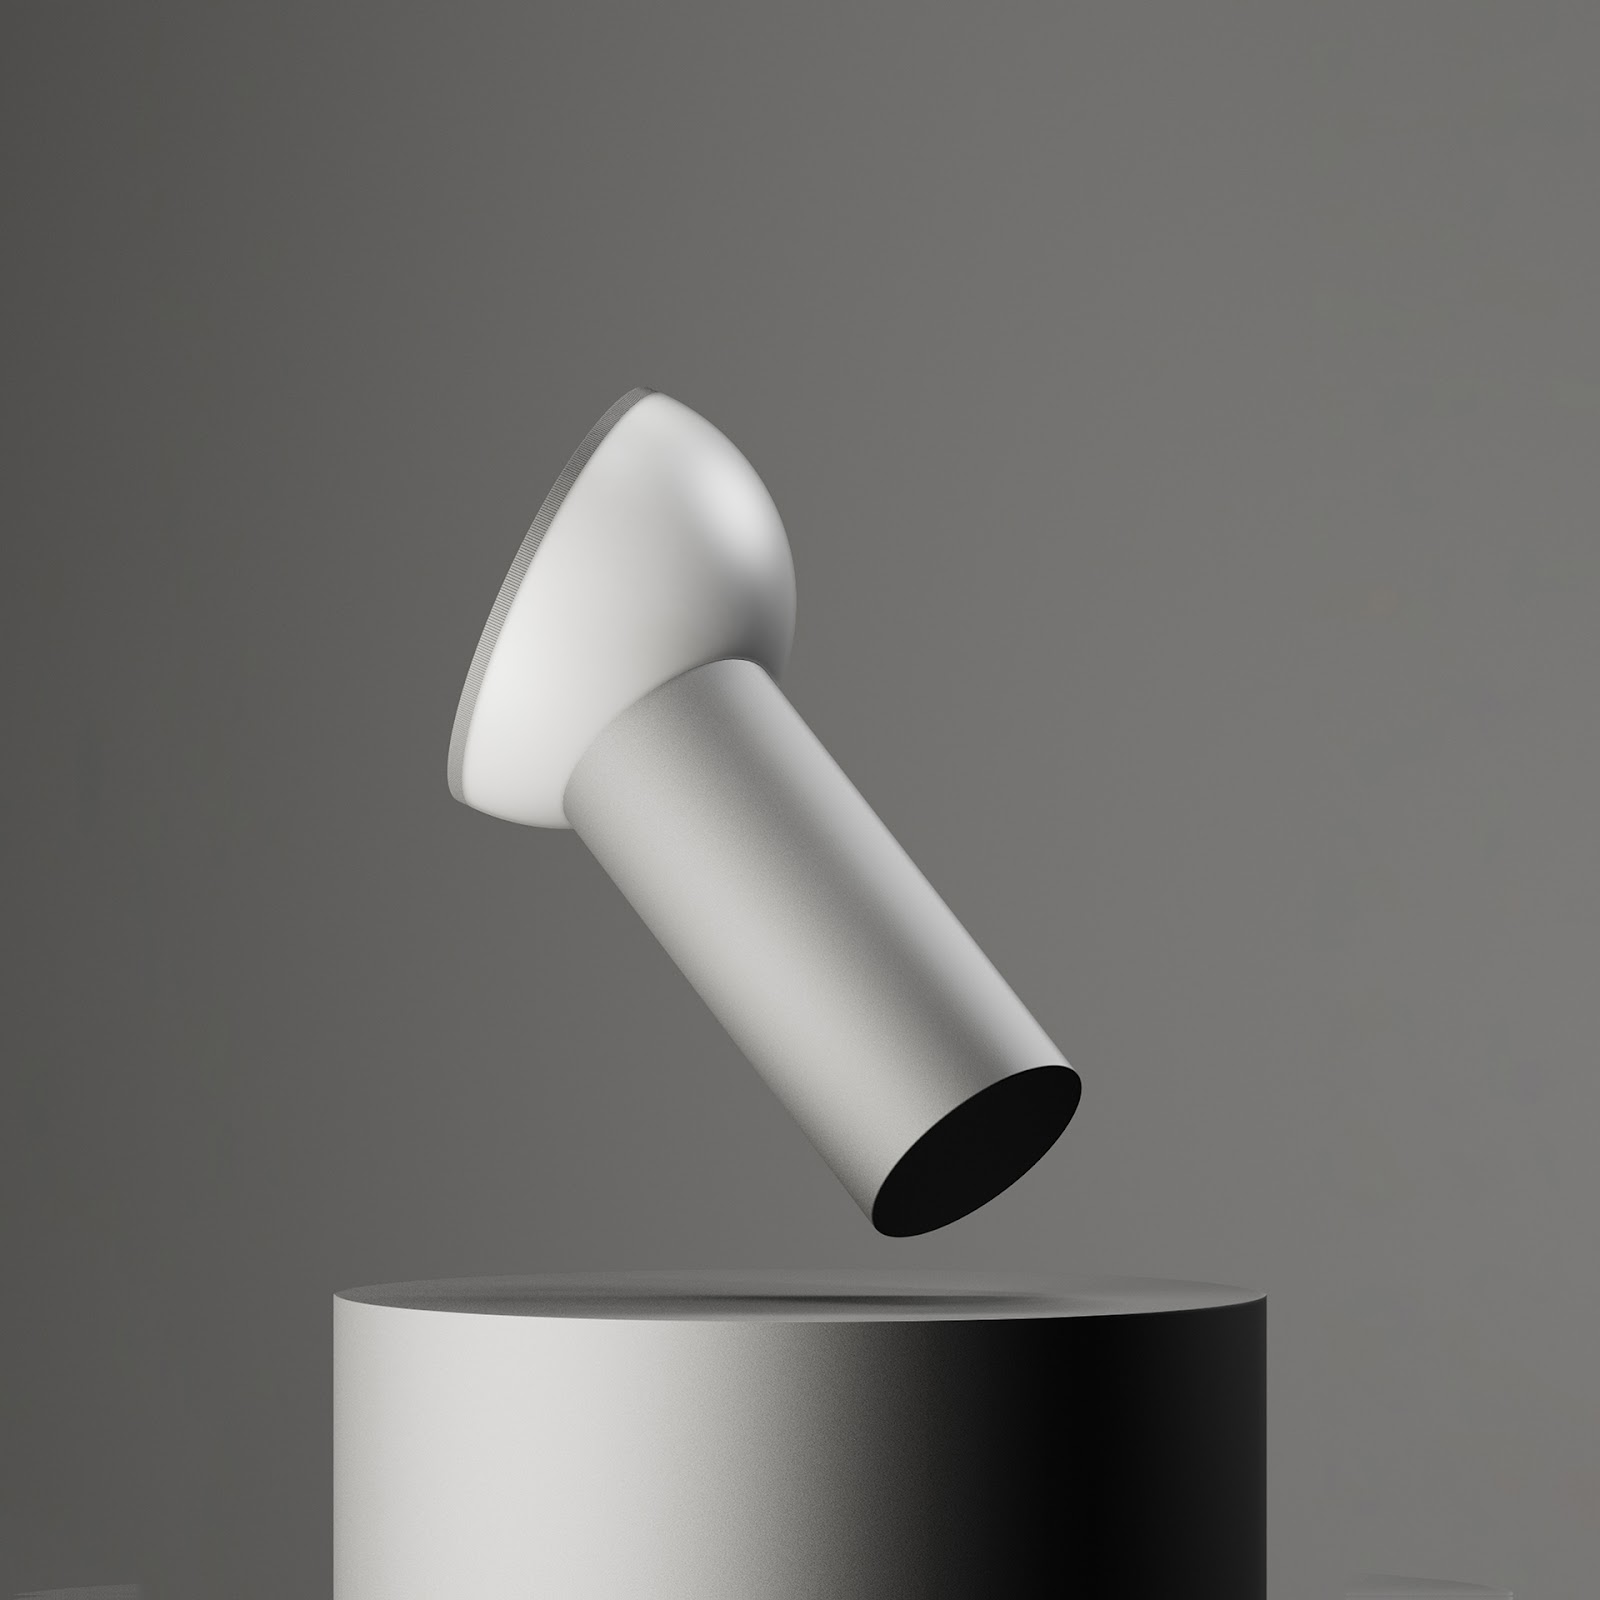 Artifact from the DORICA Lamp: Greek Styled Industrial Design article on Abduzeedo